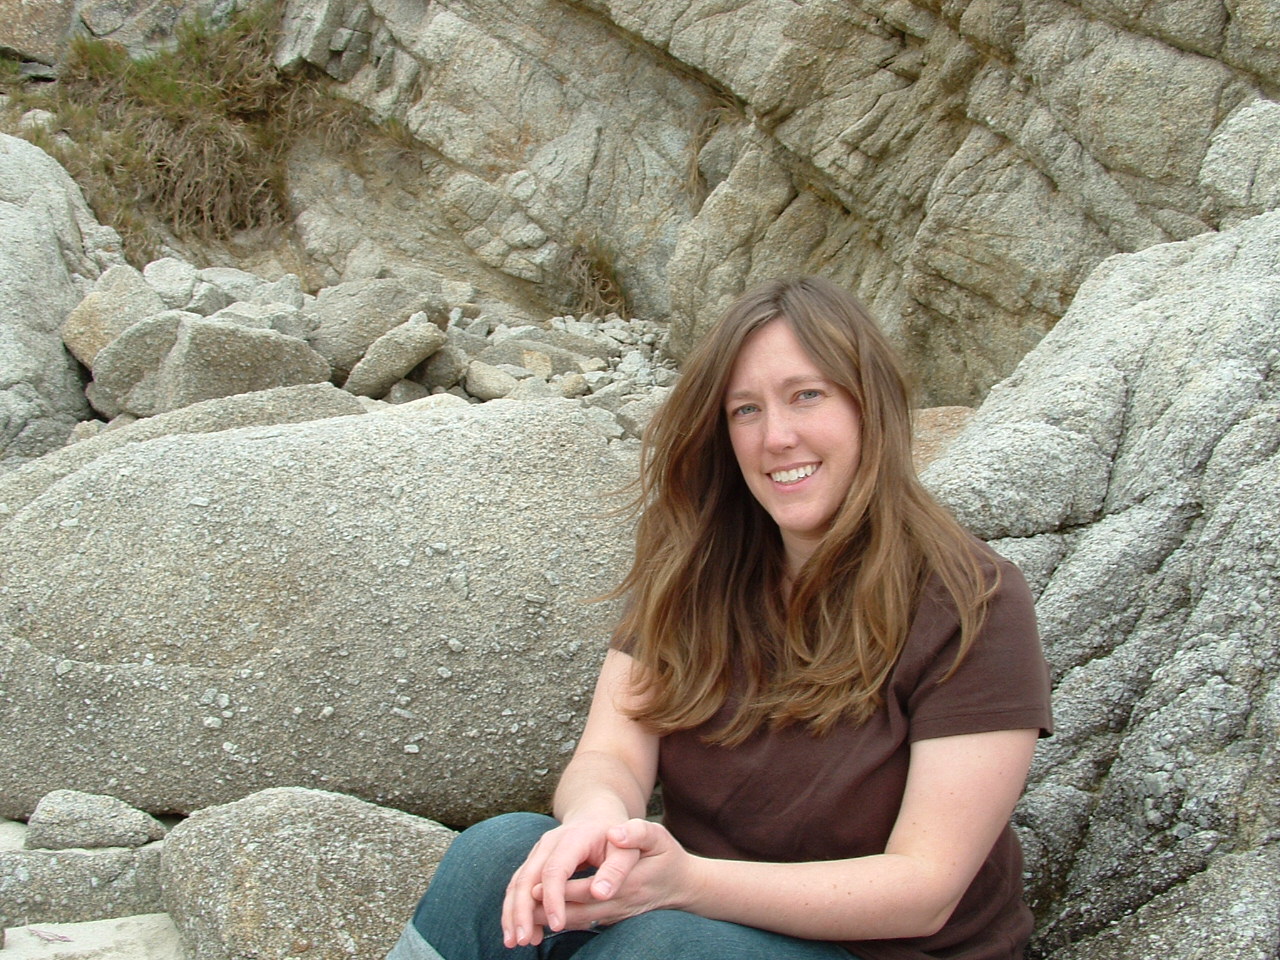 Michelle, a woman in brown shirt, sitting against gray rocks near the Pacific Ocean